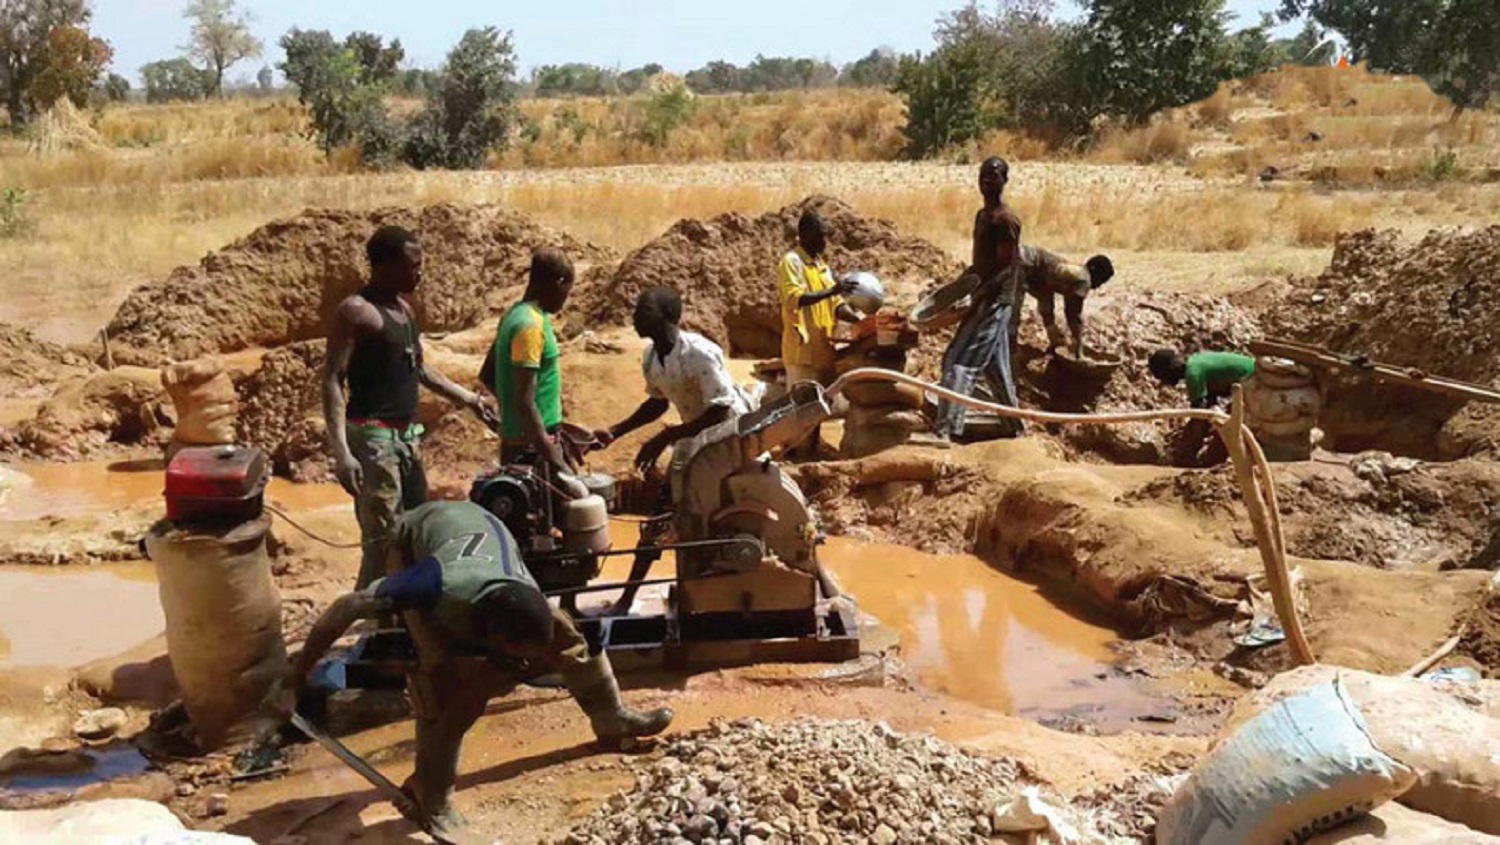 Vacate site now, FG orders illegal miners